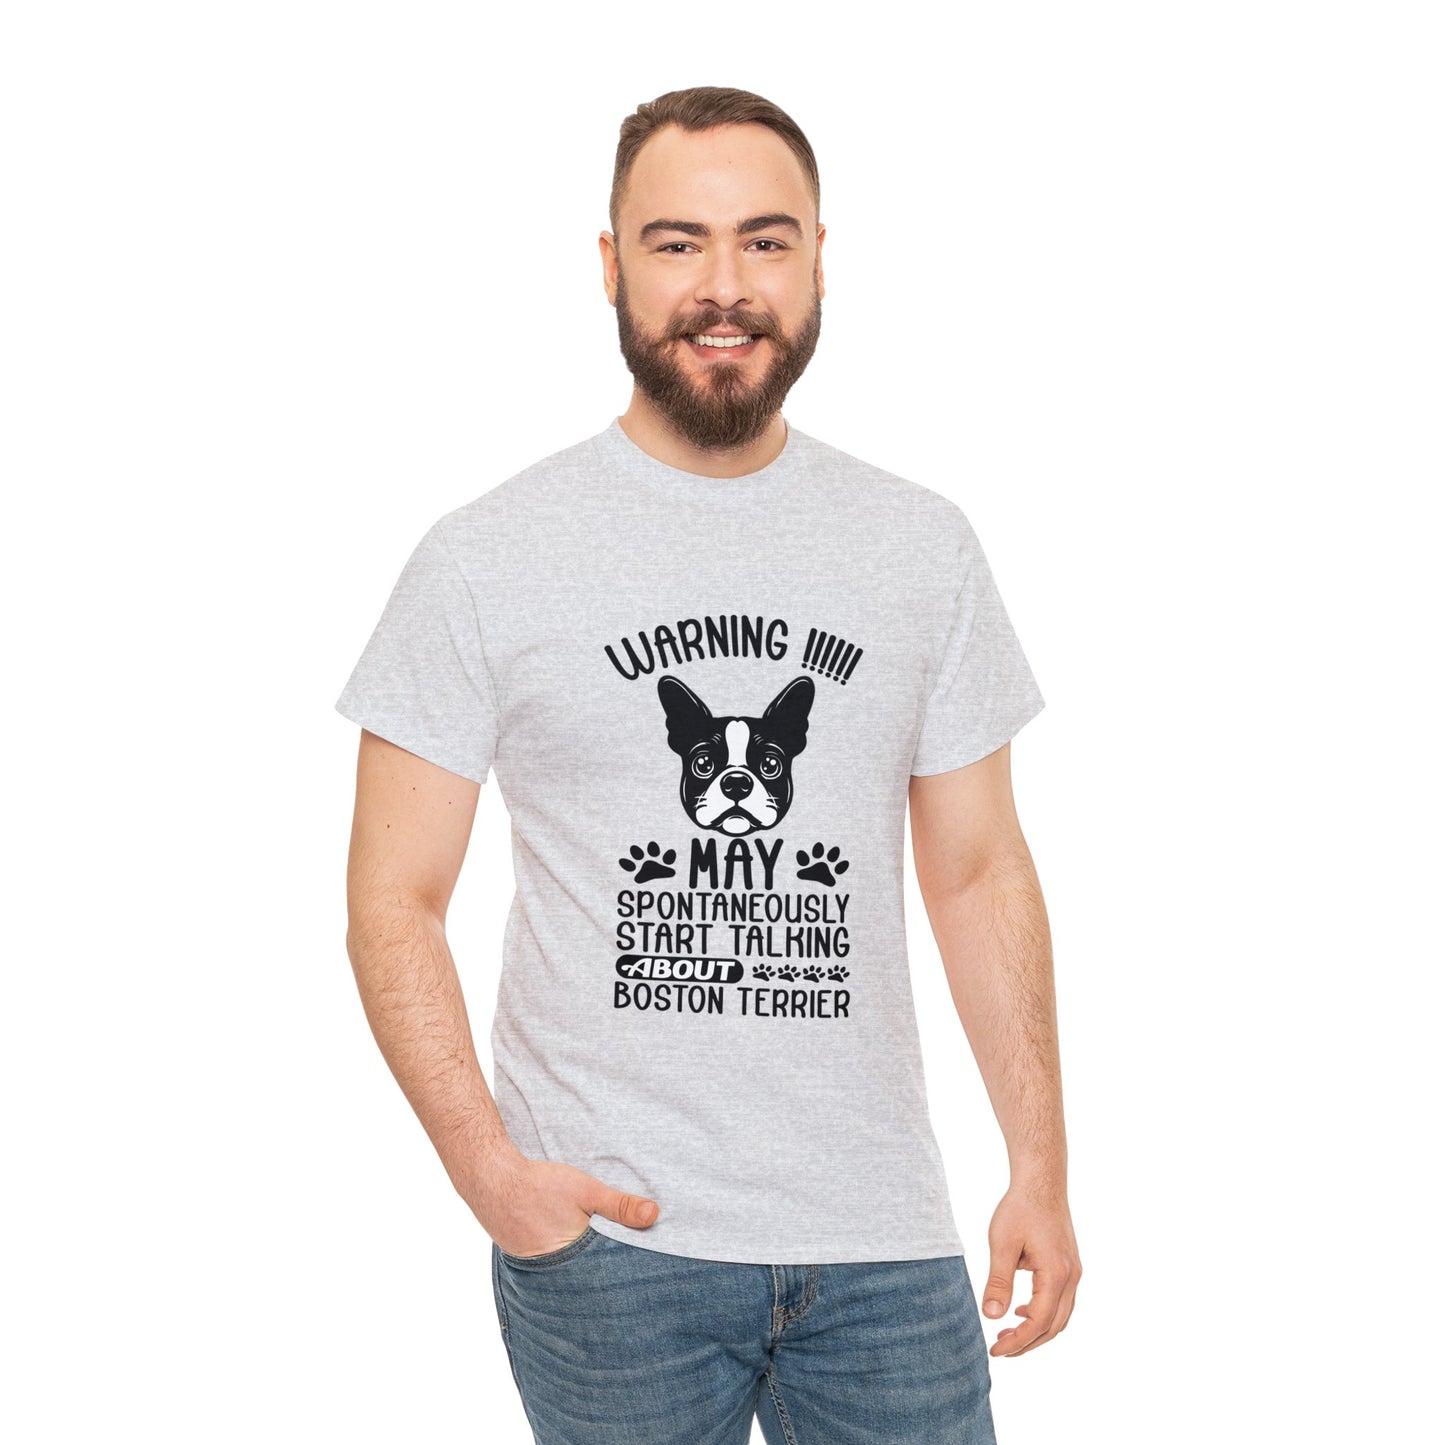 Abby  - Unisex Tshirts for Boston Terrier Lovers